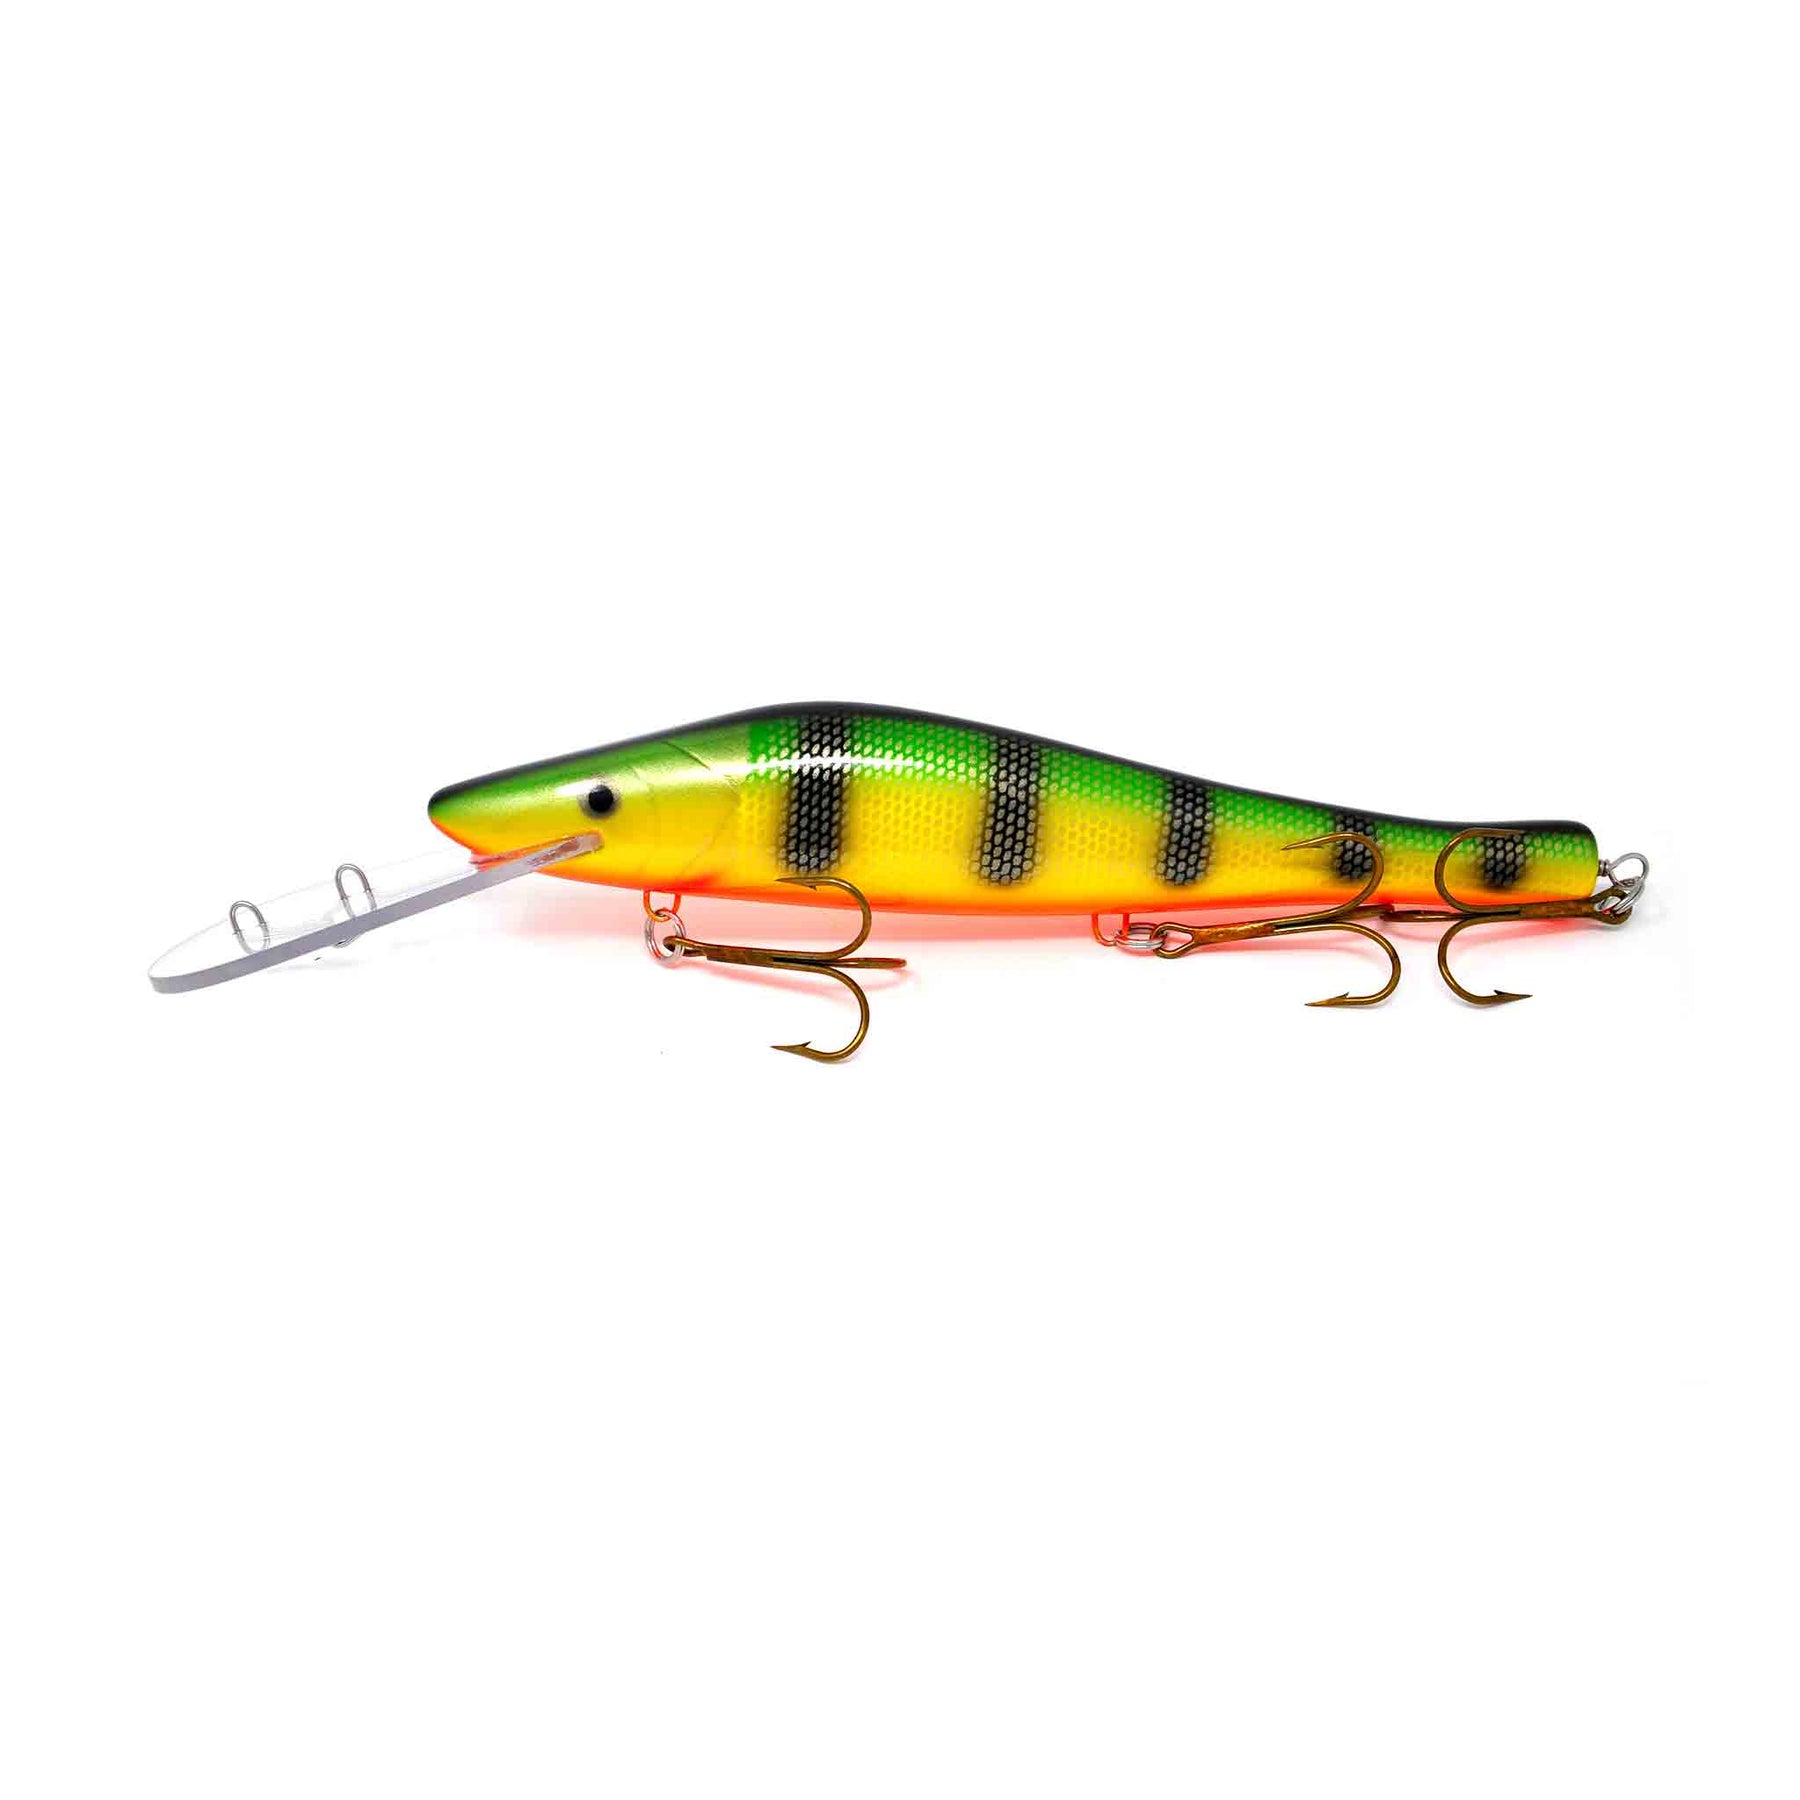 Sport King Lures 60 7956 Fishing Lure With Box